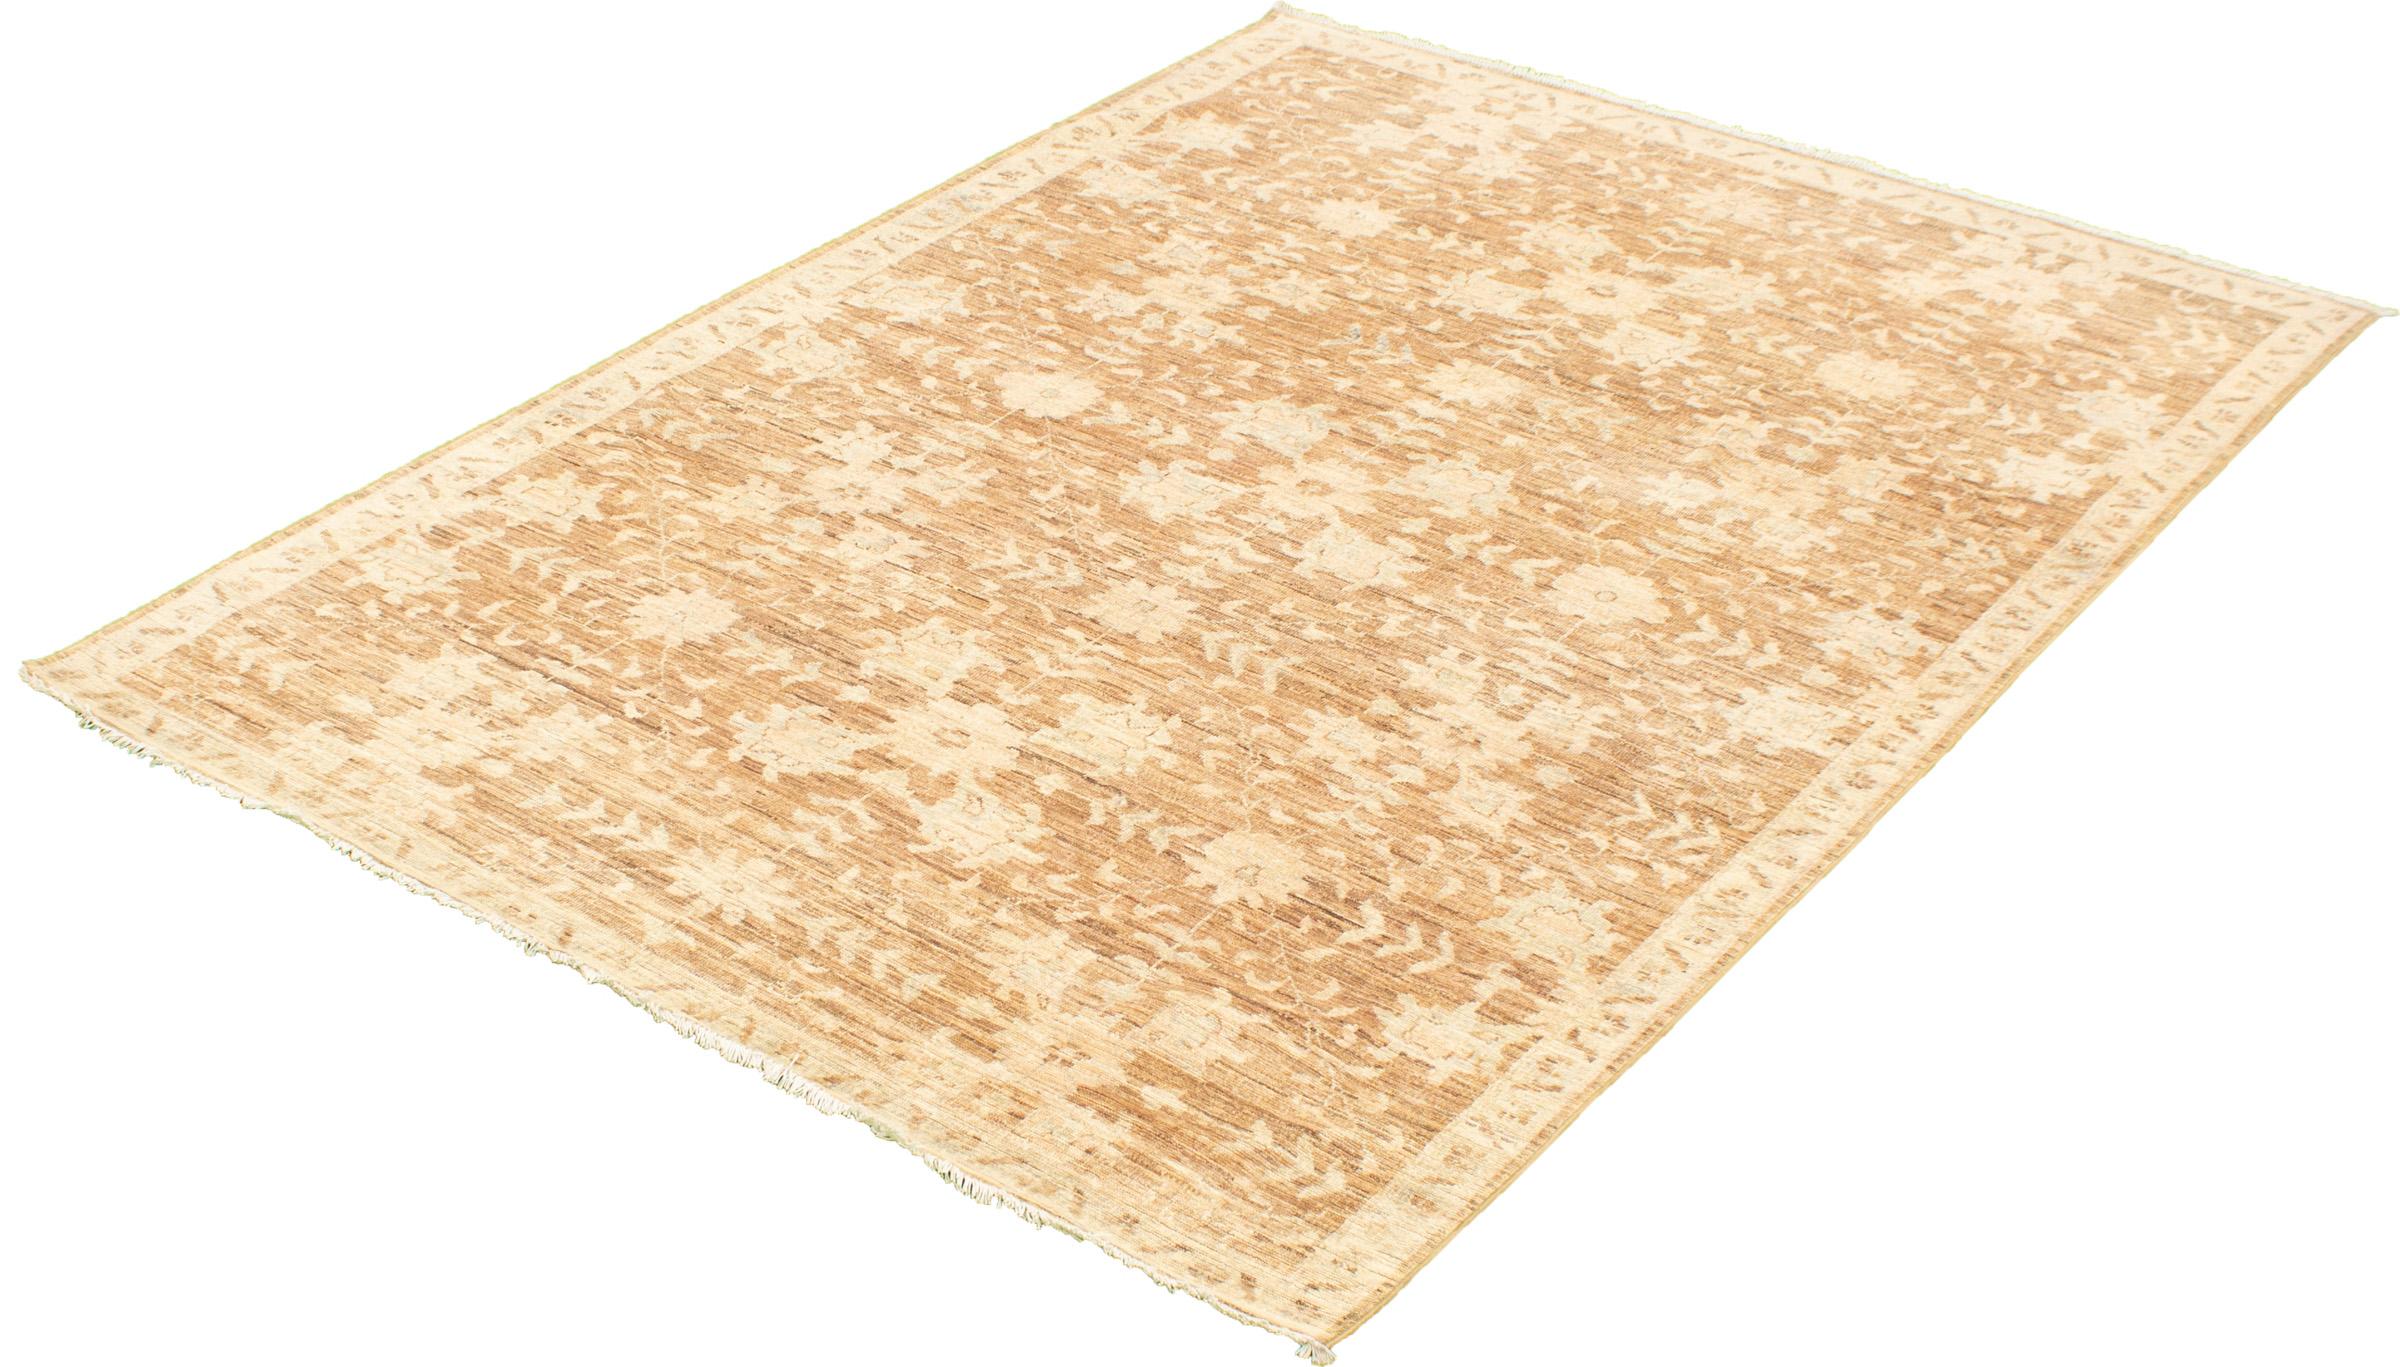 Fine Transitional Neutral Wool Persian Oushak Carpet, Hand-Knotted, 6' x 9' For Sale 1